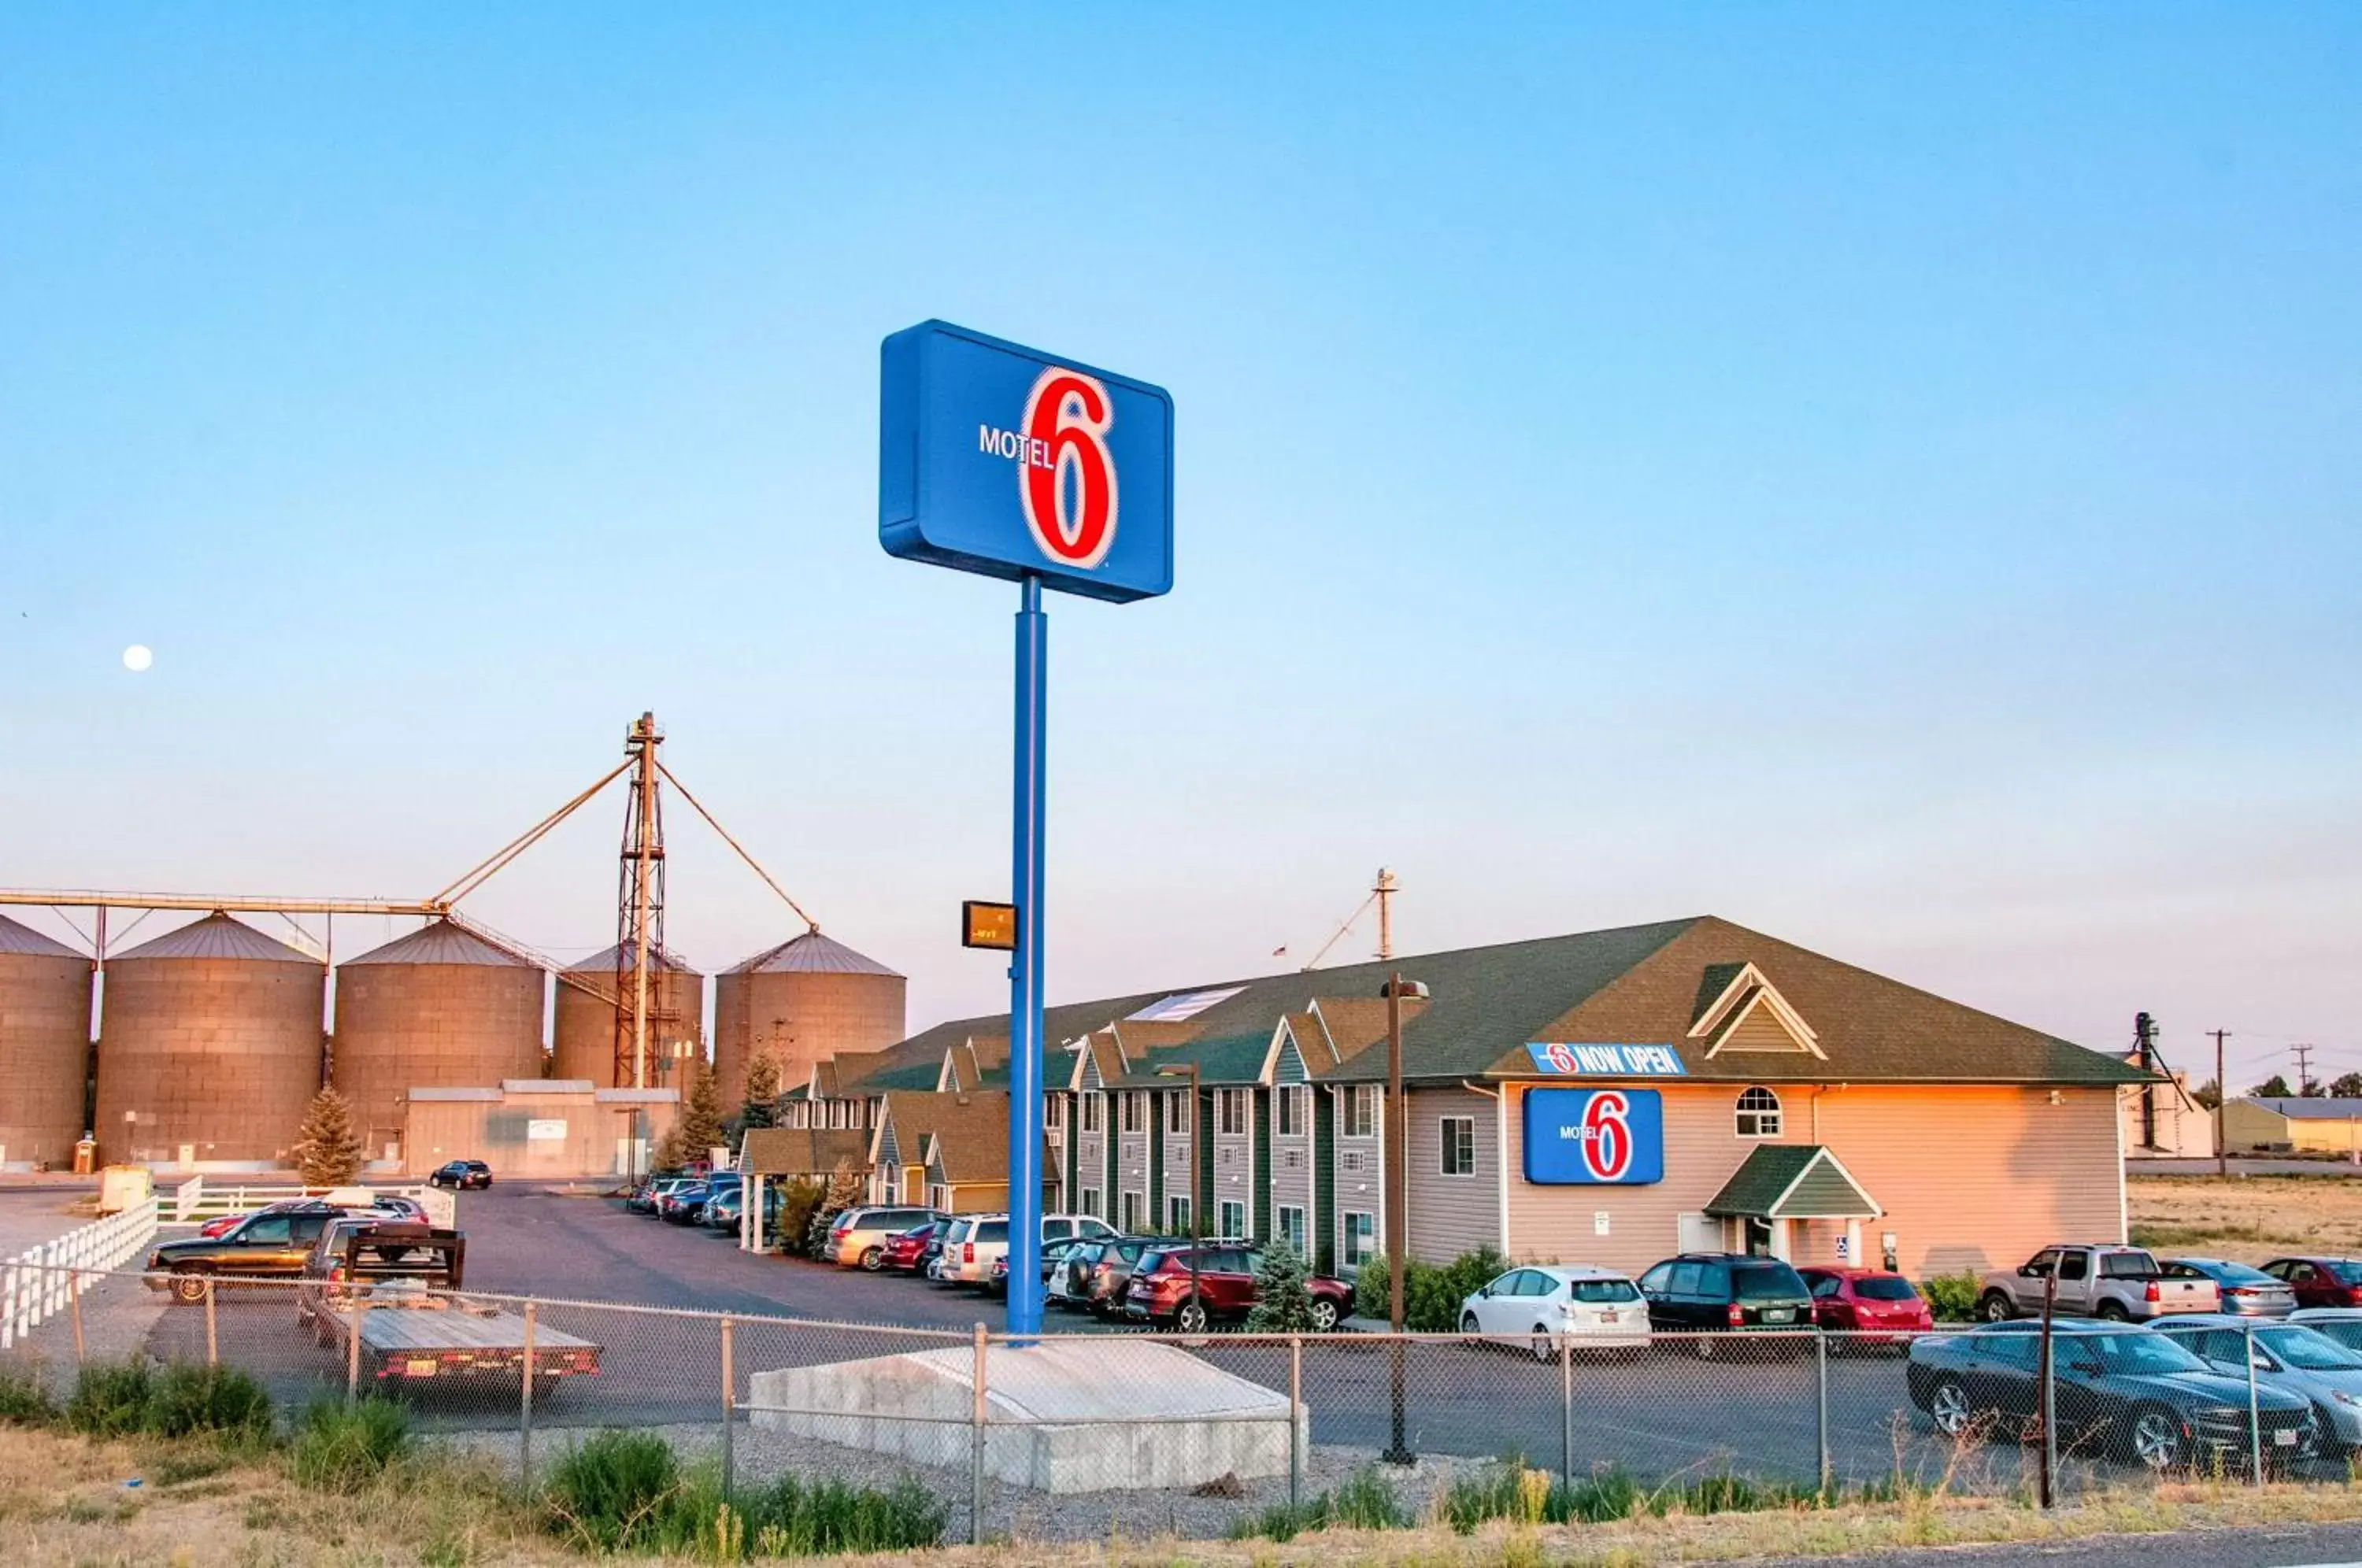 Property Building in Motel 6-Idaho Falls, ID - Snake River